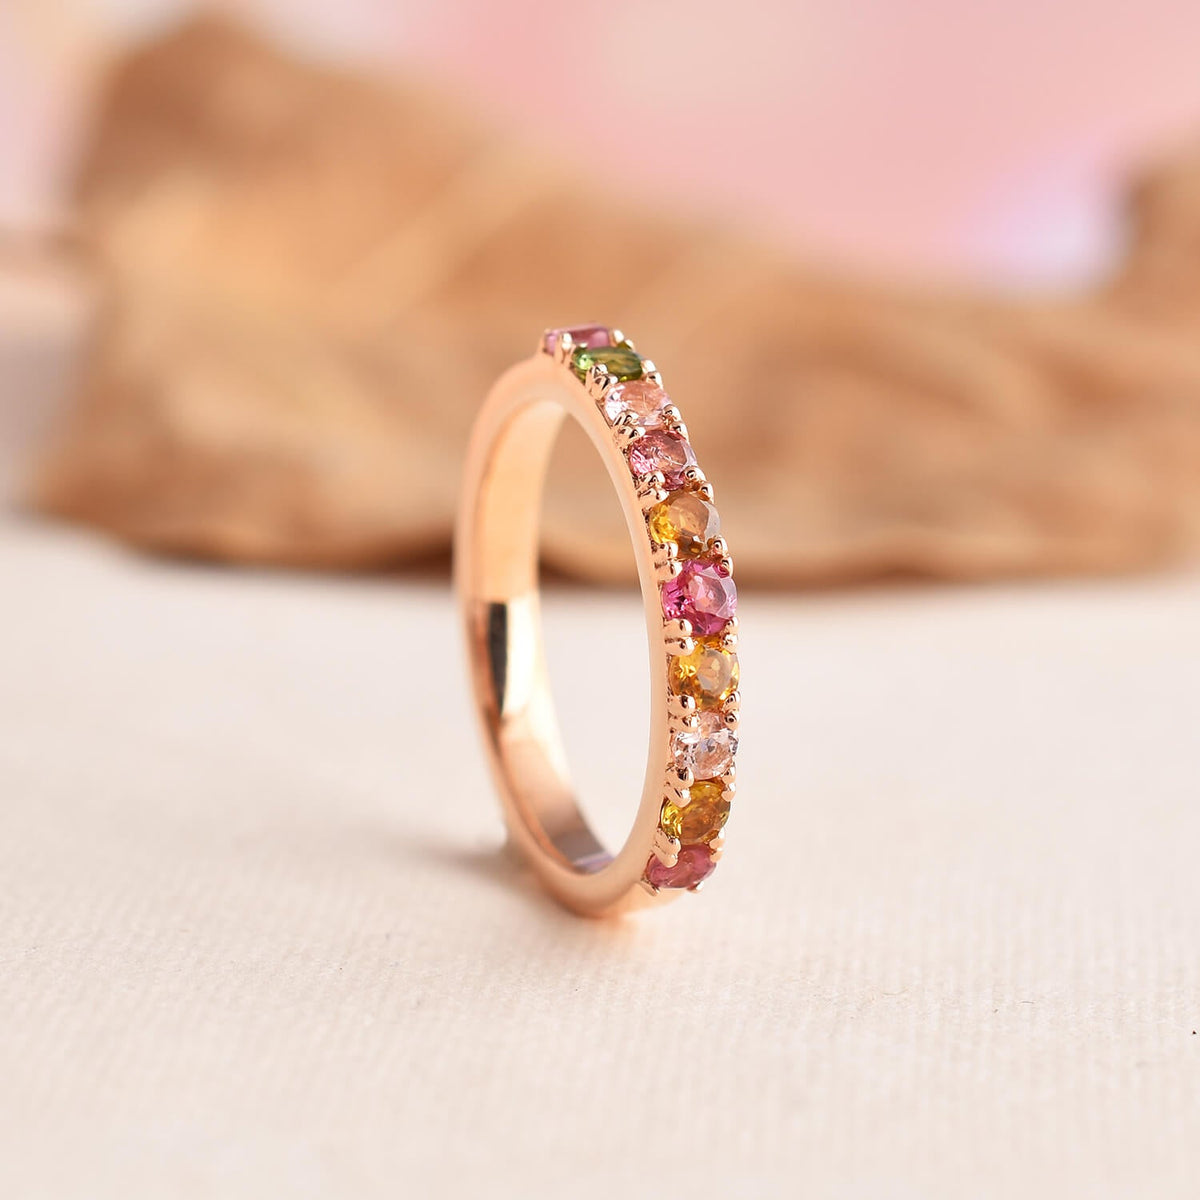 Get the Perfect 9k Yellow Gold Wedding Rings | GLAMIRA.in